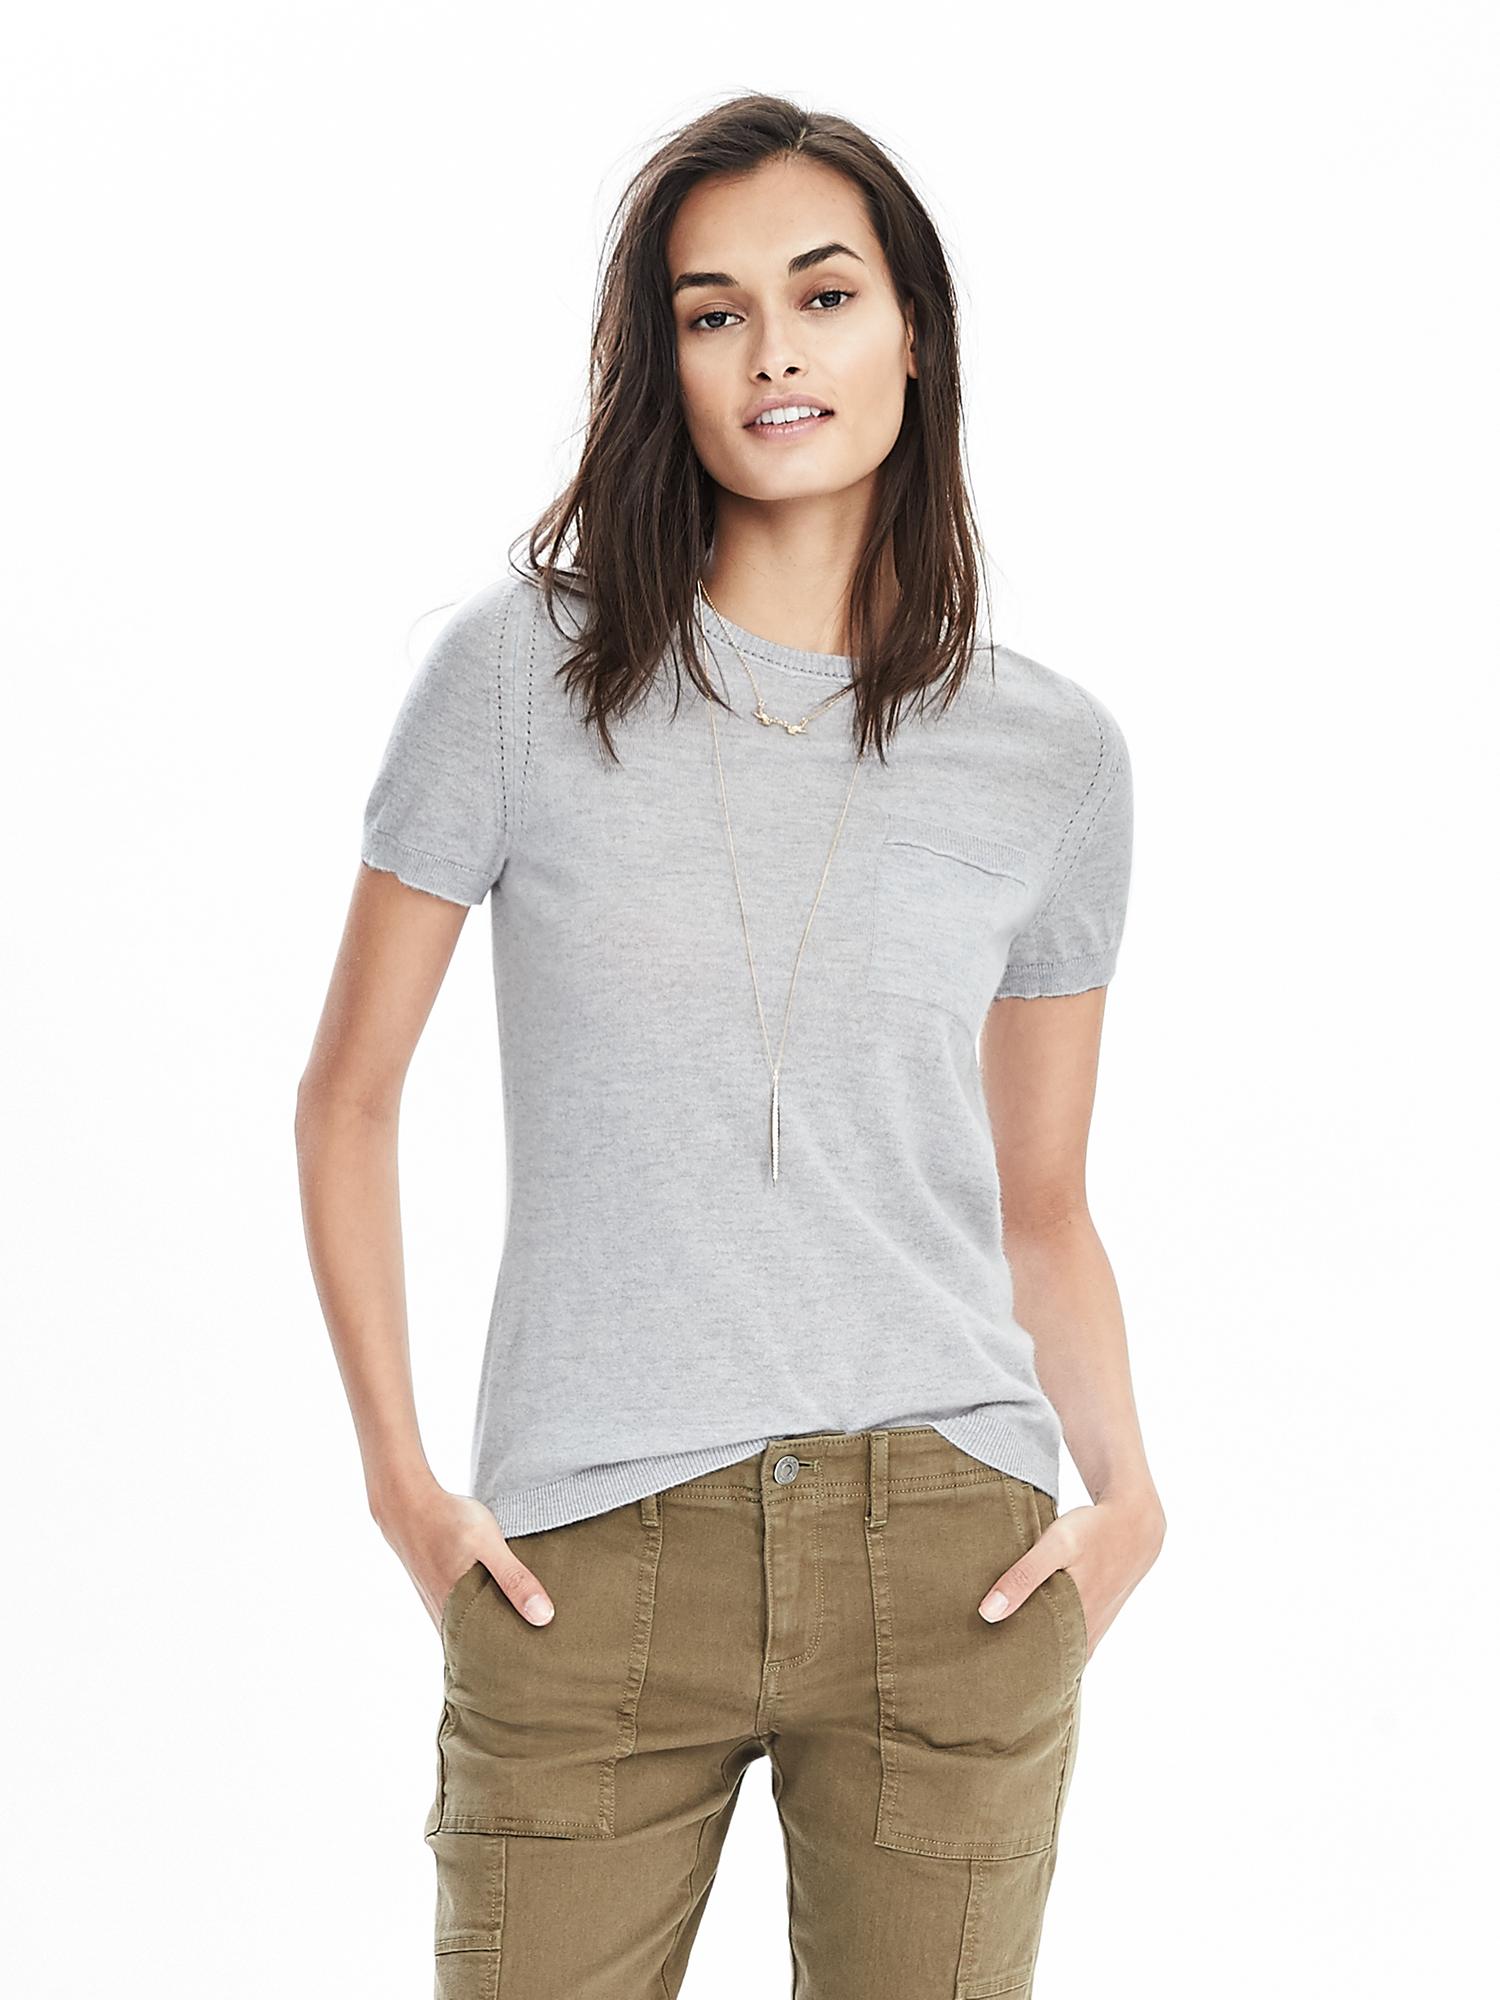 Todd & Duncan Short-Sleeve Cashmere Sweater